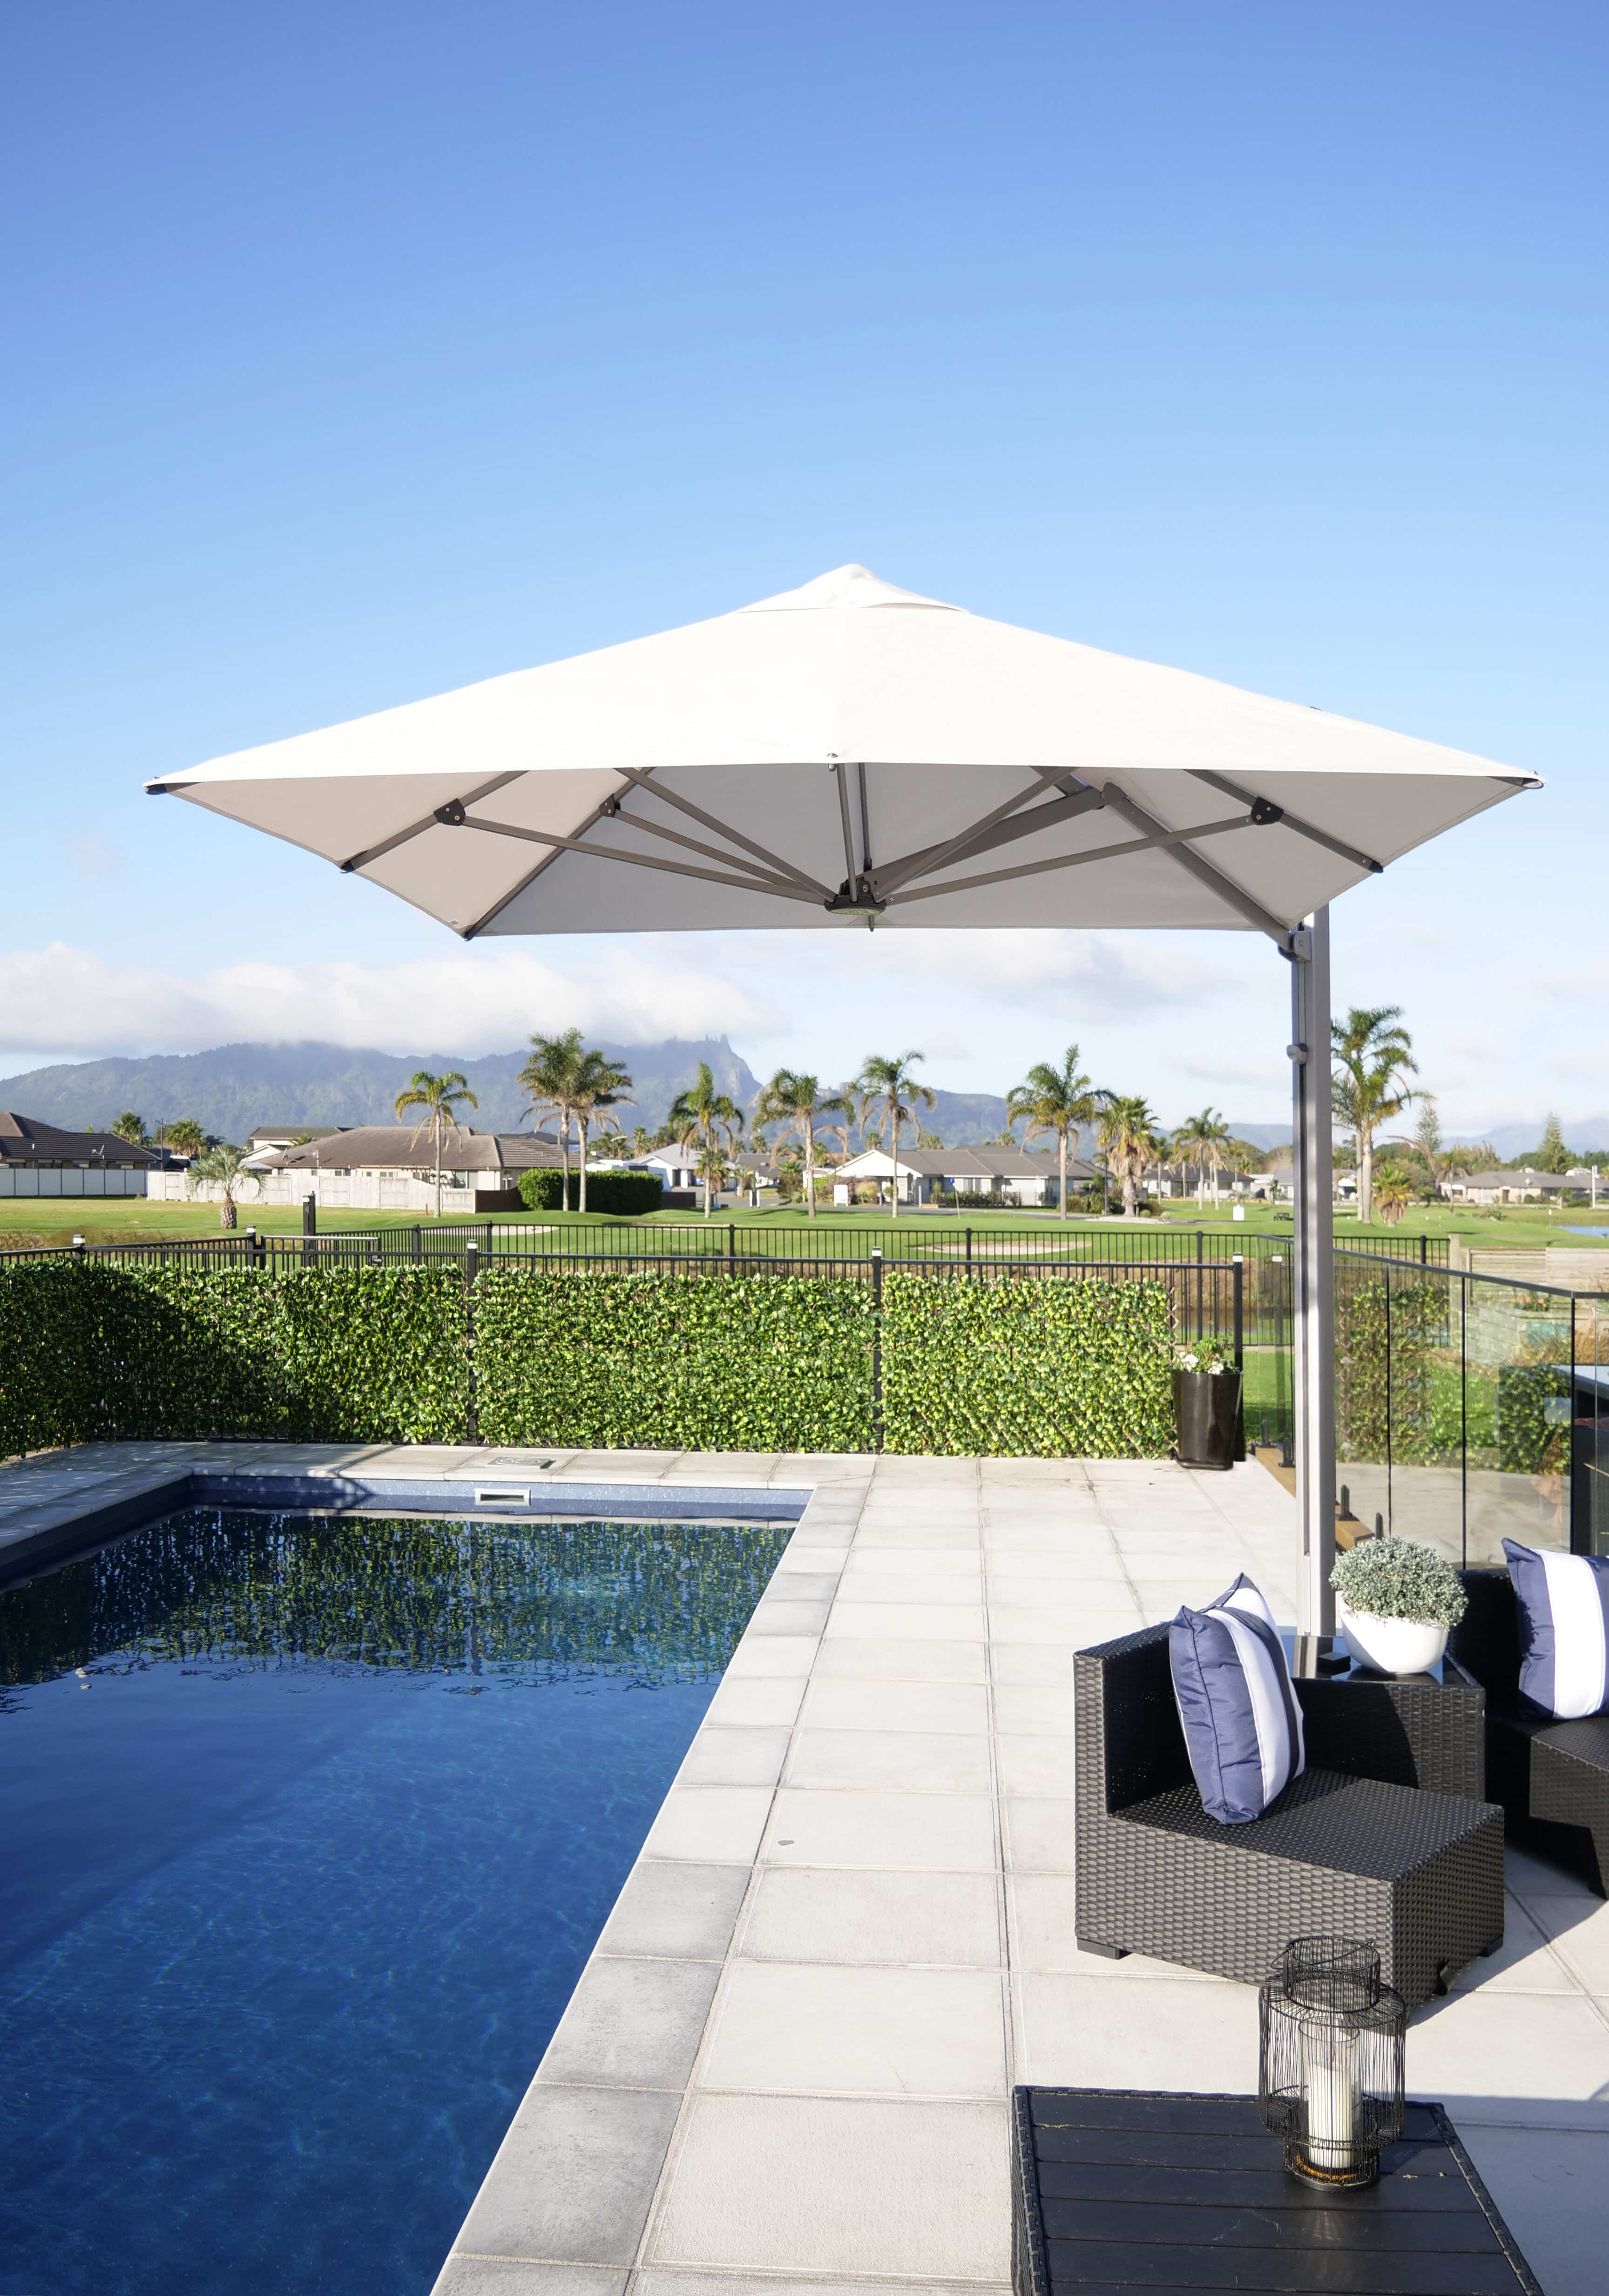 The Serenity Umbrella for Ultimate Shade